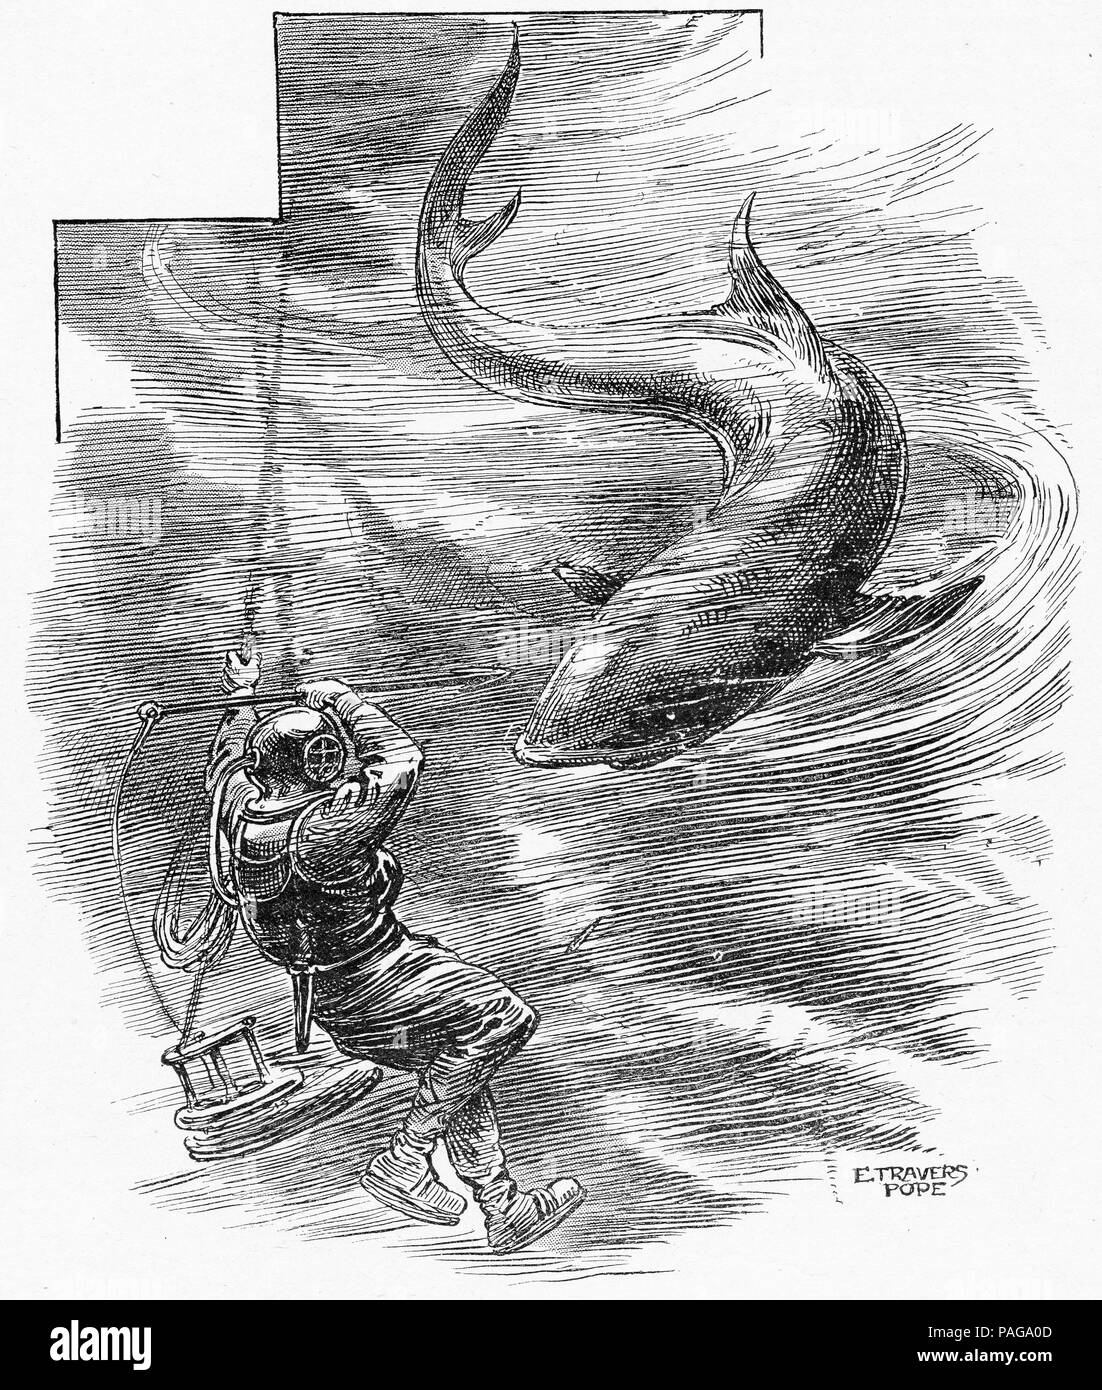 Engraving of a deep sea diver fending off a shark attack. From Young England, An Illustrated Monthly for Boys, 1903. Stock Photo